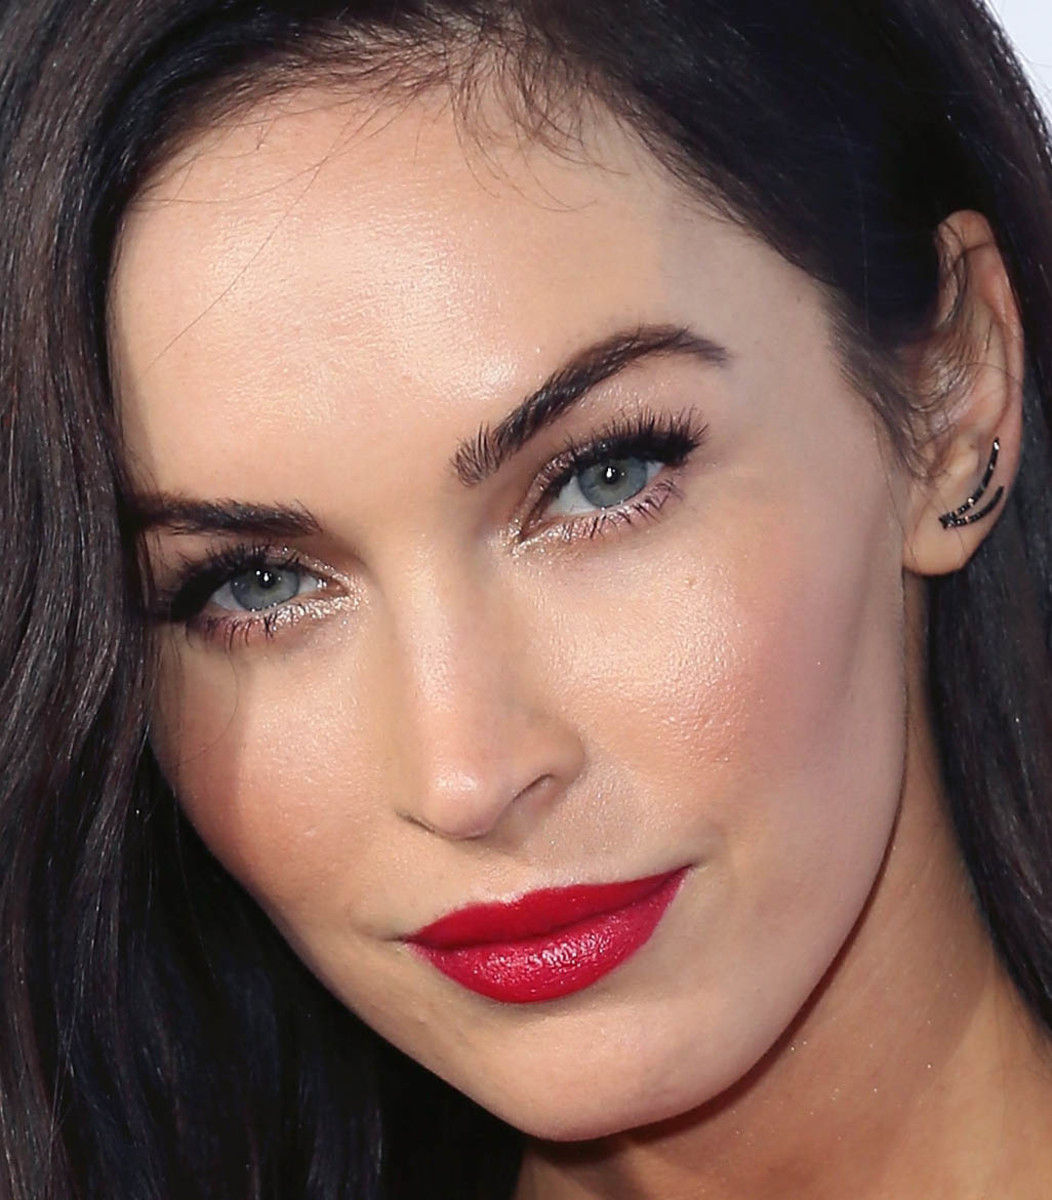 Can You Wear Red Lips With a Red Dress? Megan Fox Did!